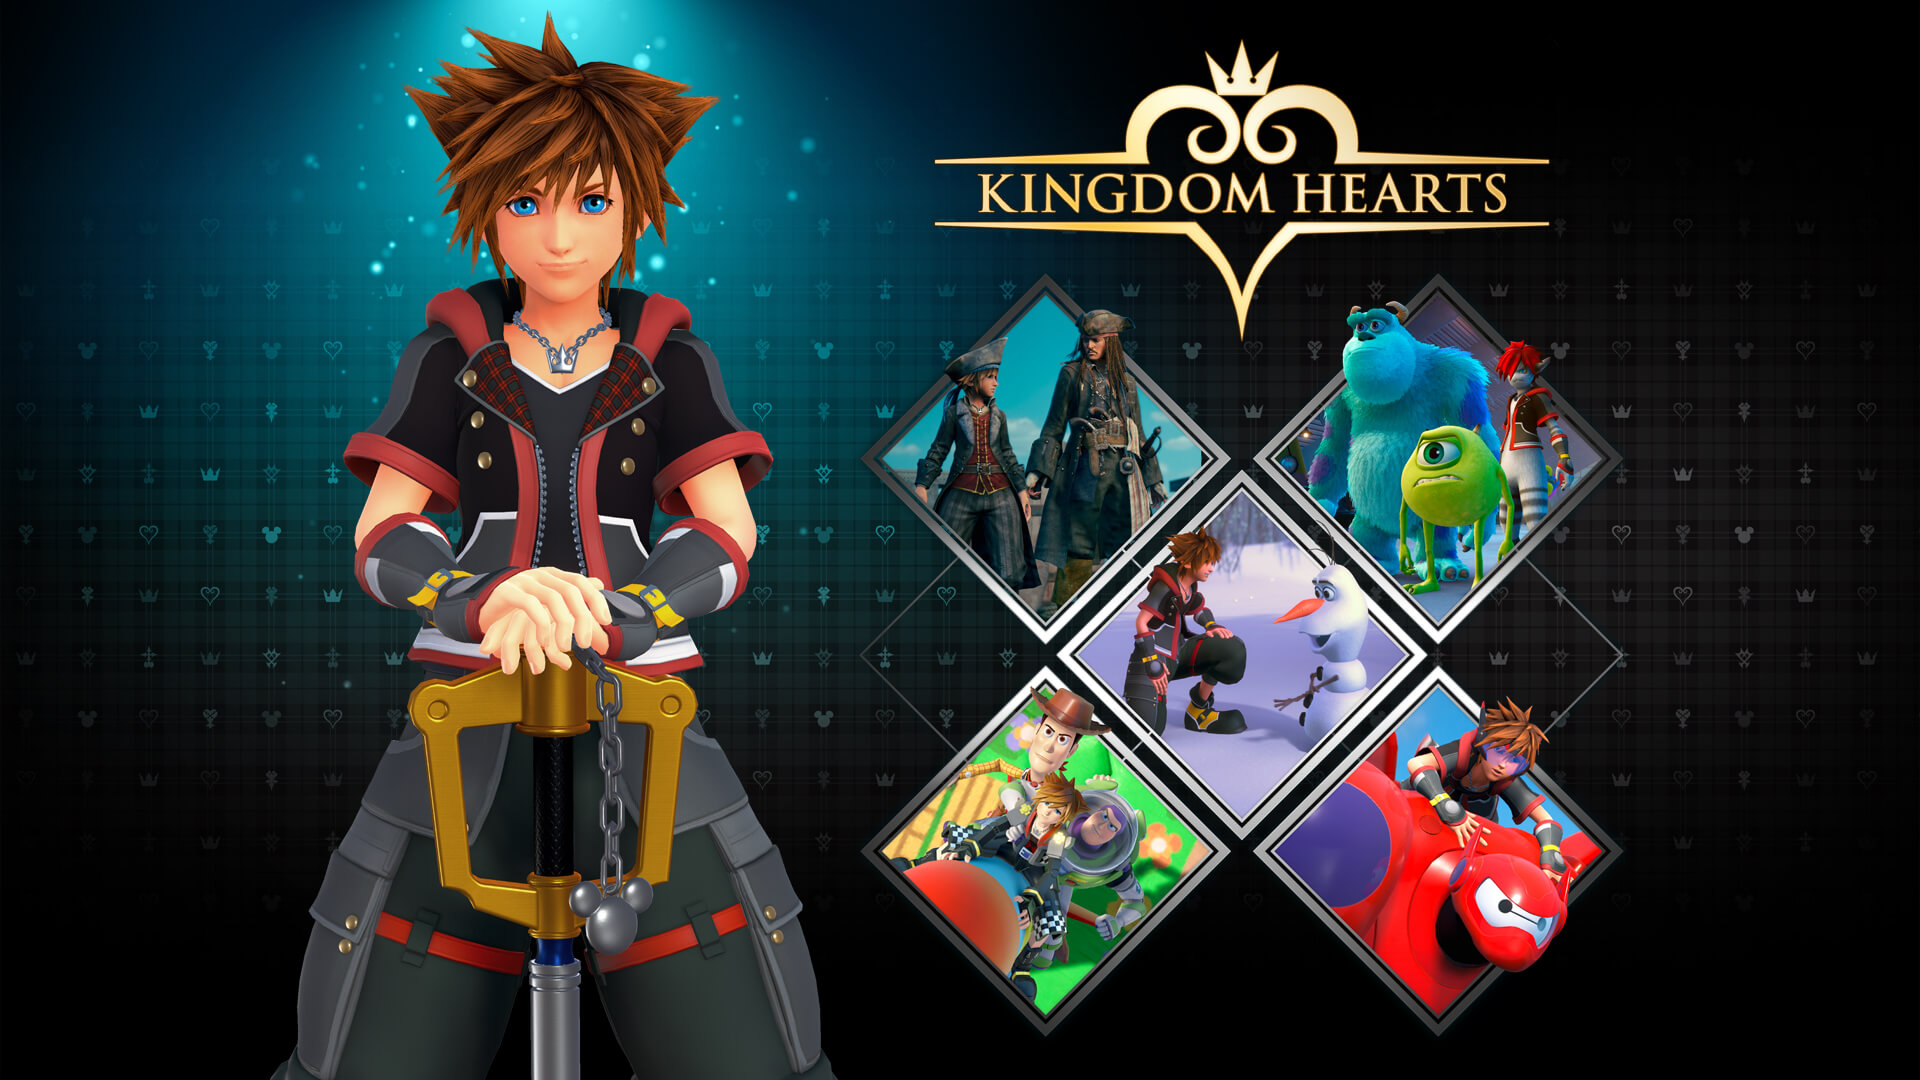 KINGDOM HEARTS PC Game Latest Version Free Download